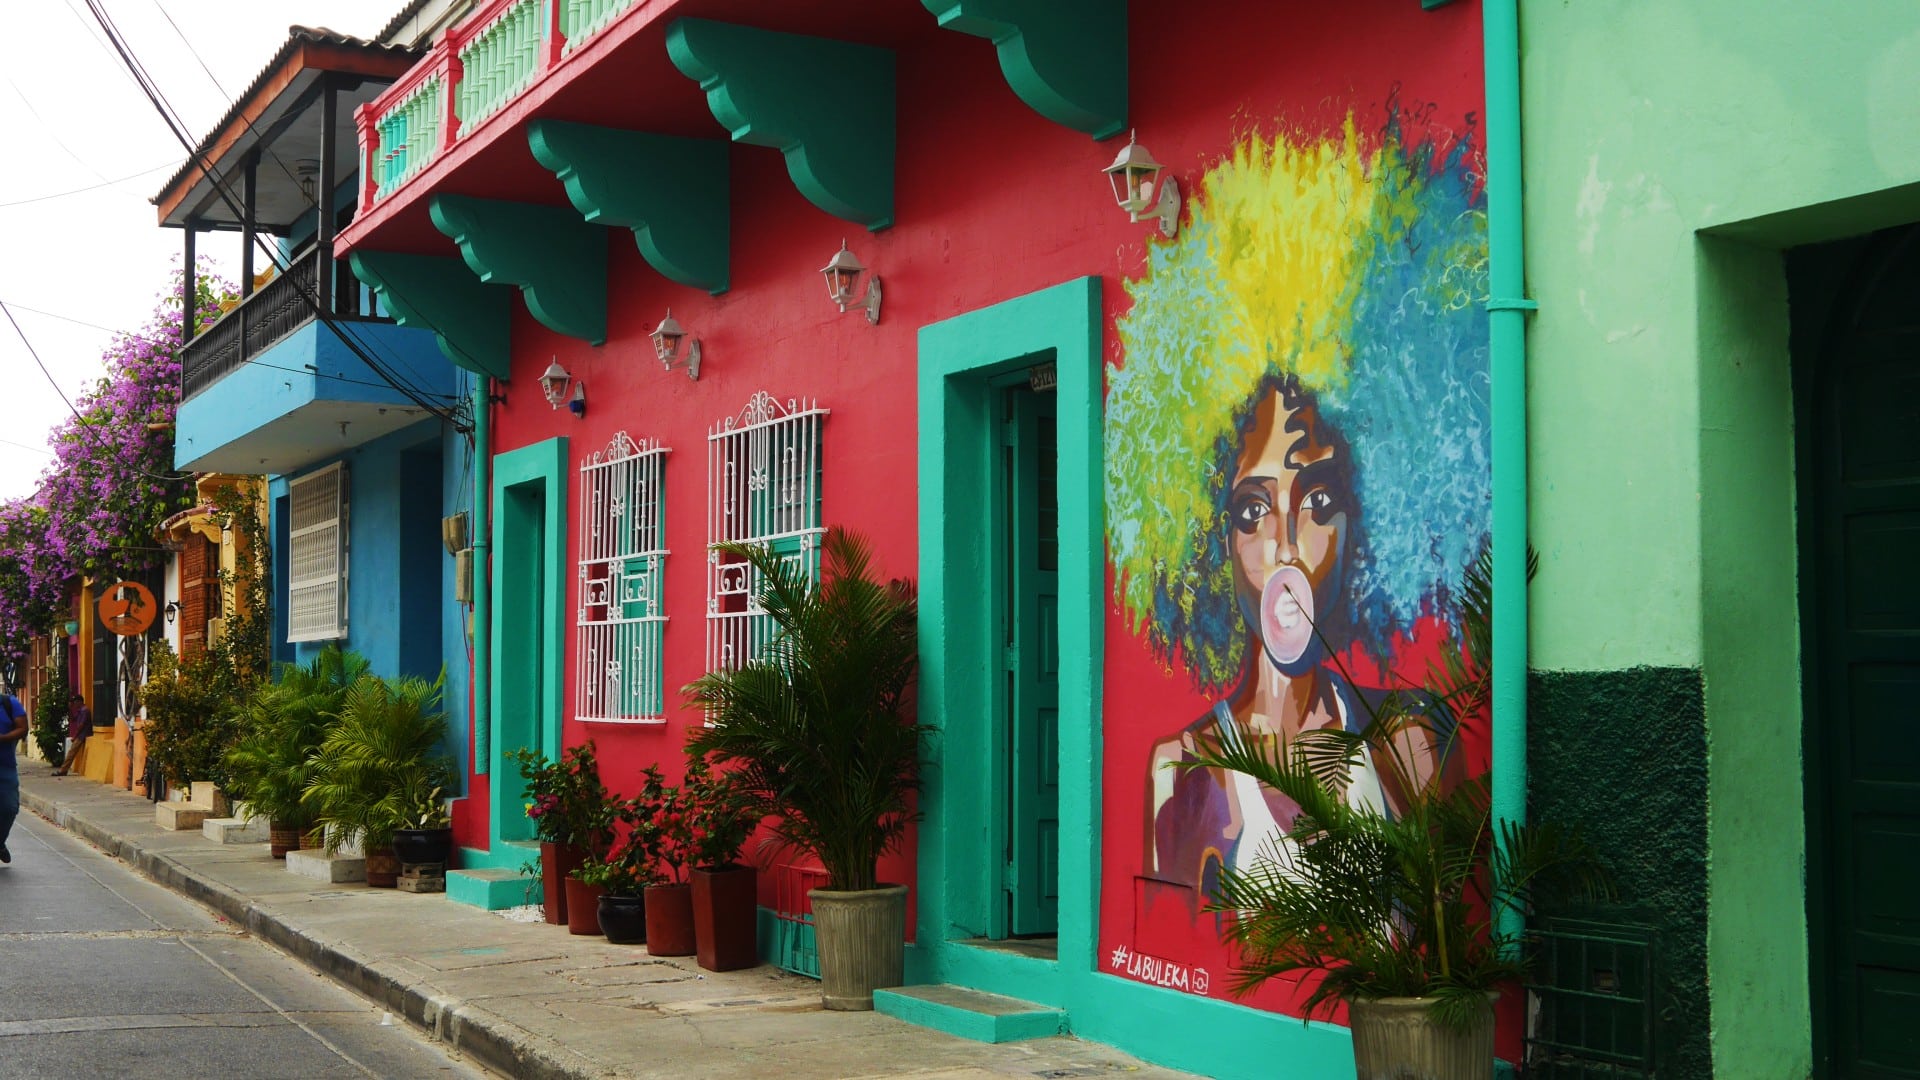 Located just outside the walles of the Centro Histórico, Getsemaní offers a great mix of nightlife, urban art & colorful architecture